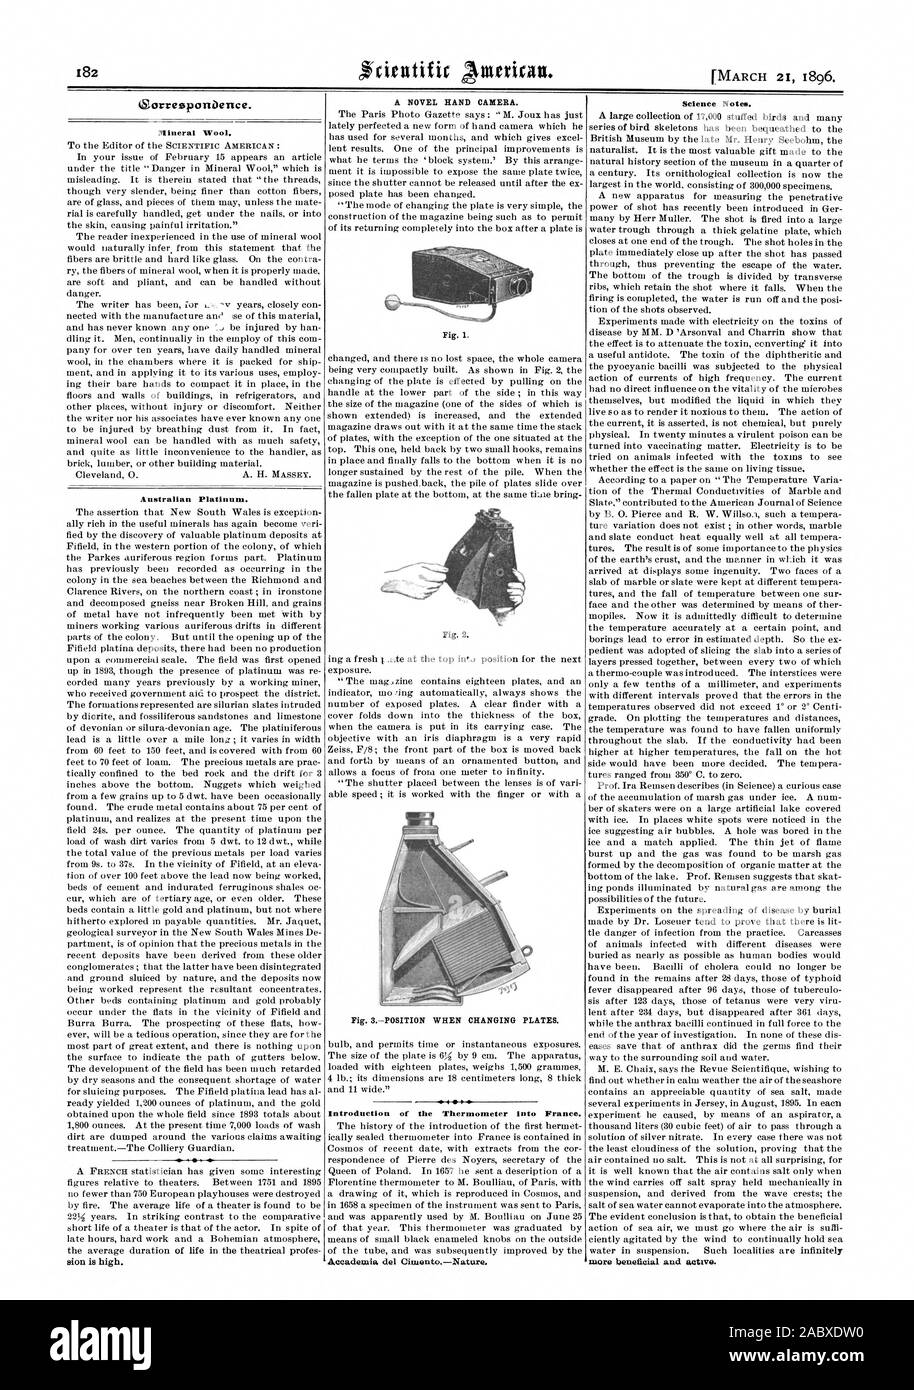 orresponDence. Mineral Wool. Australian Platinum. A NOVEL HAND CAMERA. Fig. L Fig. 2. Fig. SPOSITION WHEN CHANGING PLATES. Introduction of the Thermometer into France., scientific american, 1896-03-21 Stock Photo